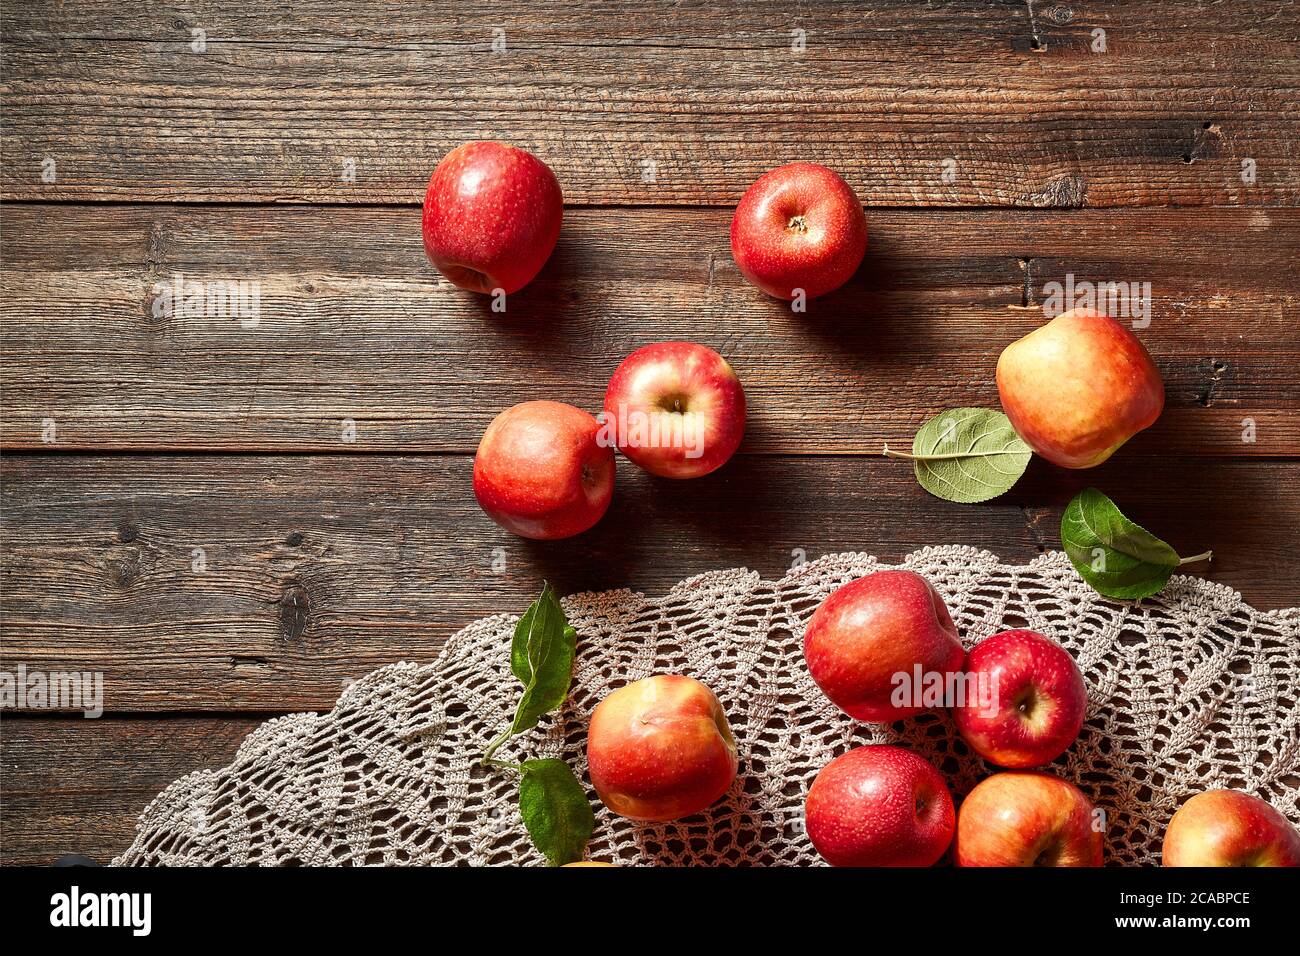 Red apple on rustic wooden table and crochet tablecloth. Summer or autumn season. Stock Photo